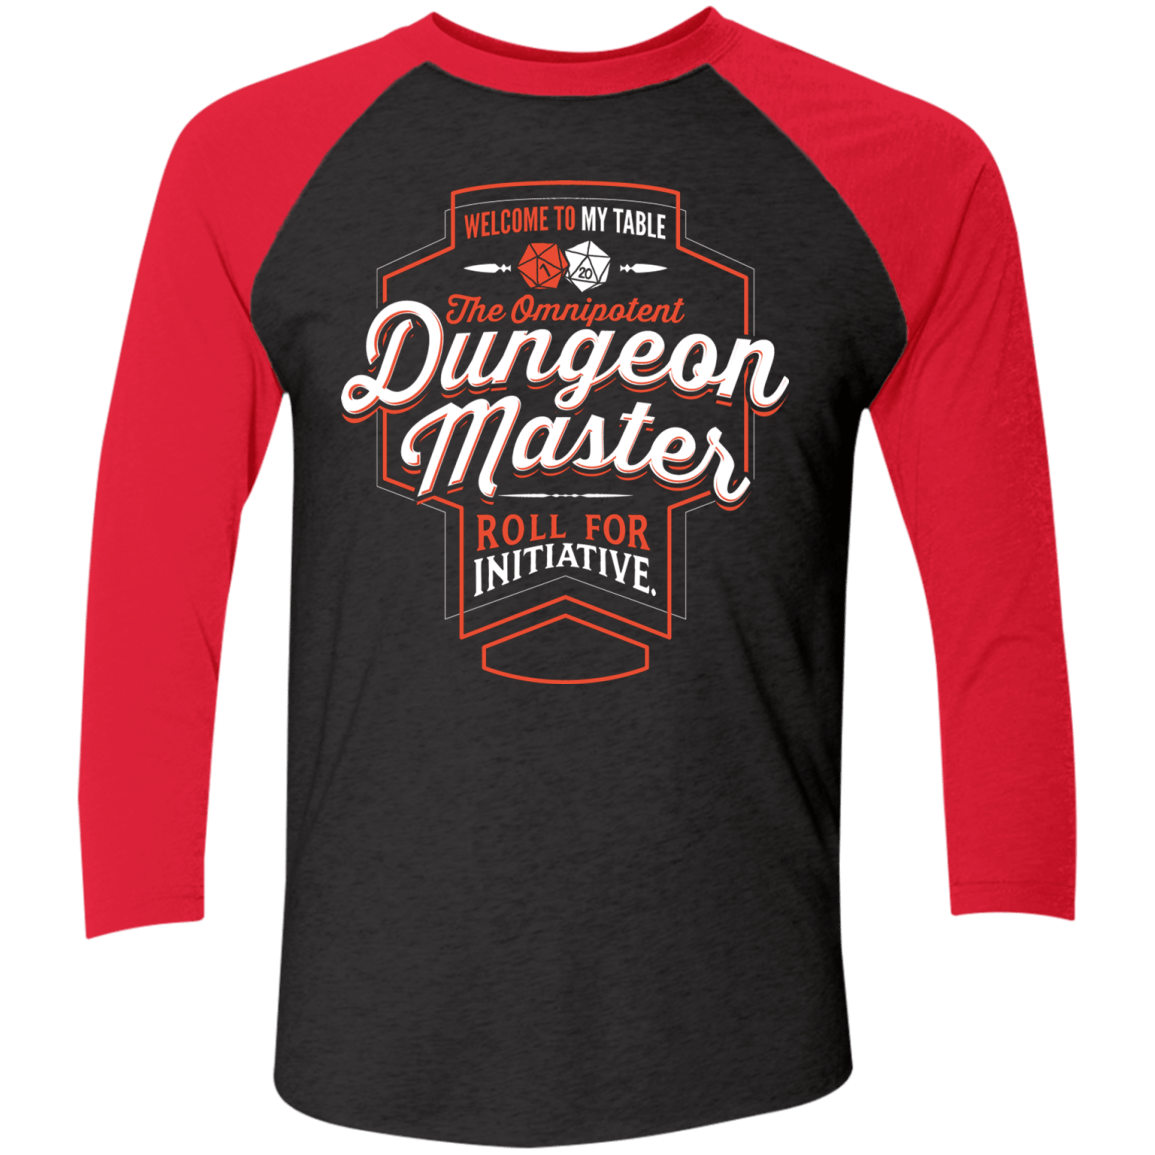 T-Shirts Vintage Black/Vintage Red / X-Small Dungeon Master Men's Triblend 3/4 Sleeve